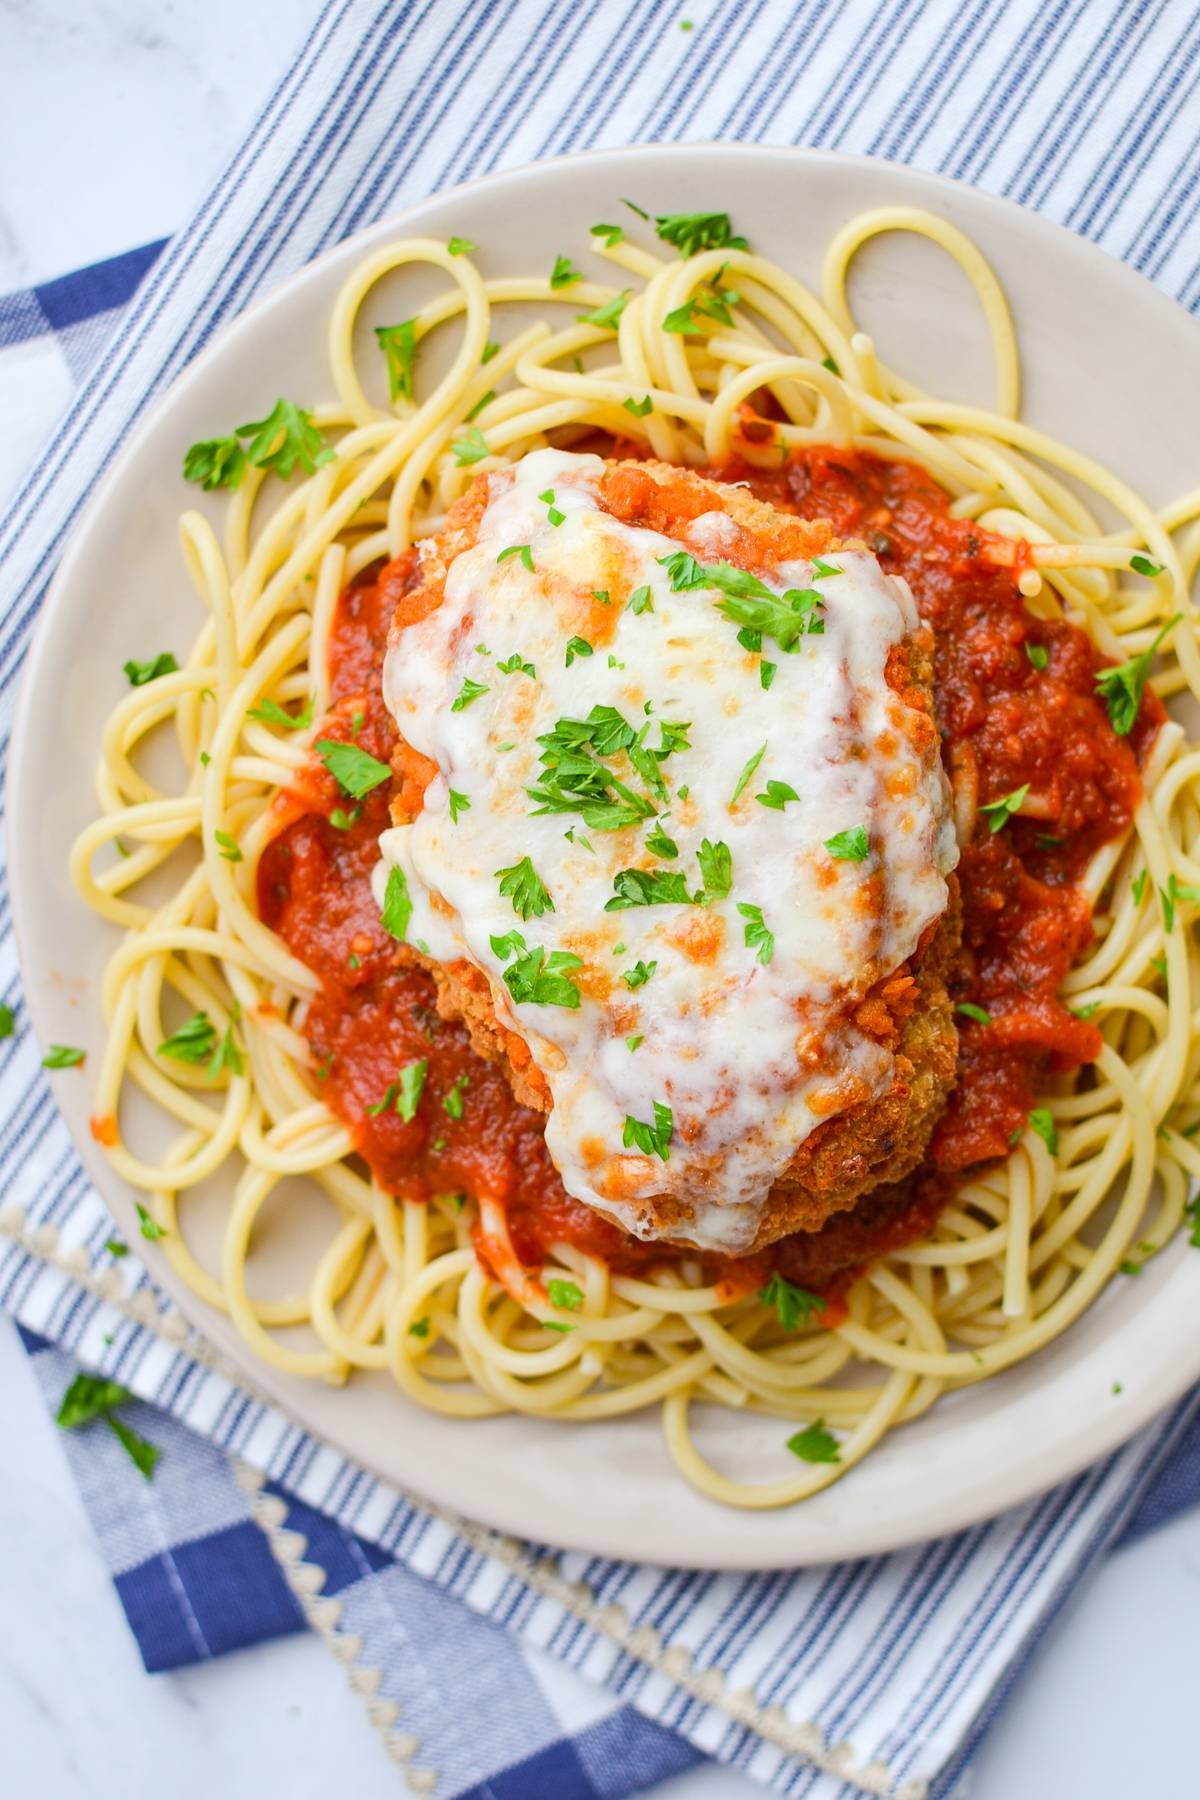 A plate of pasta with chicken parmesan, marinara and cooked pasta.